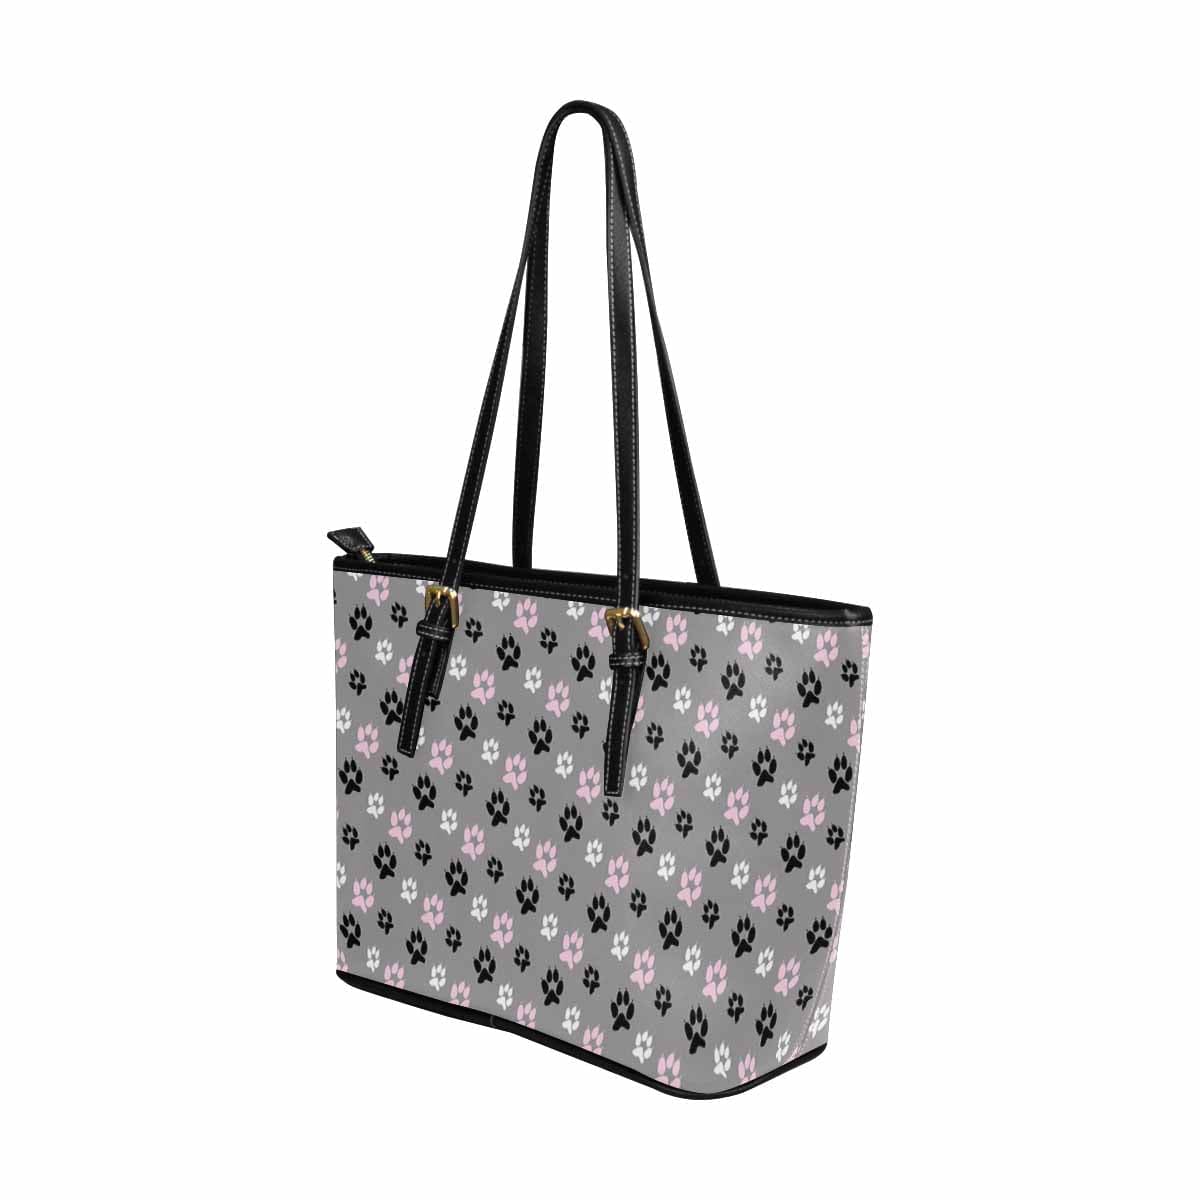 Large Leather Tote Shoulder Bag - Tri-color Paws Grey Tote - Bags | Leather